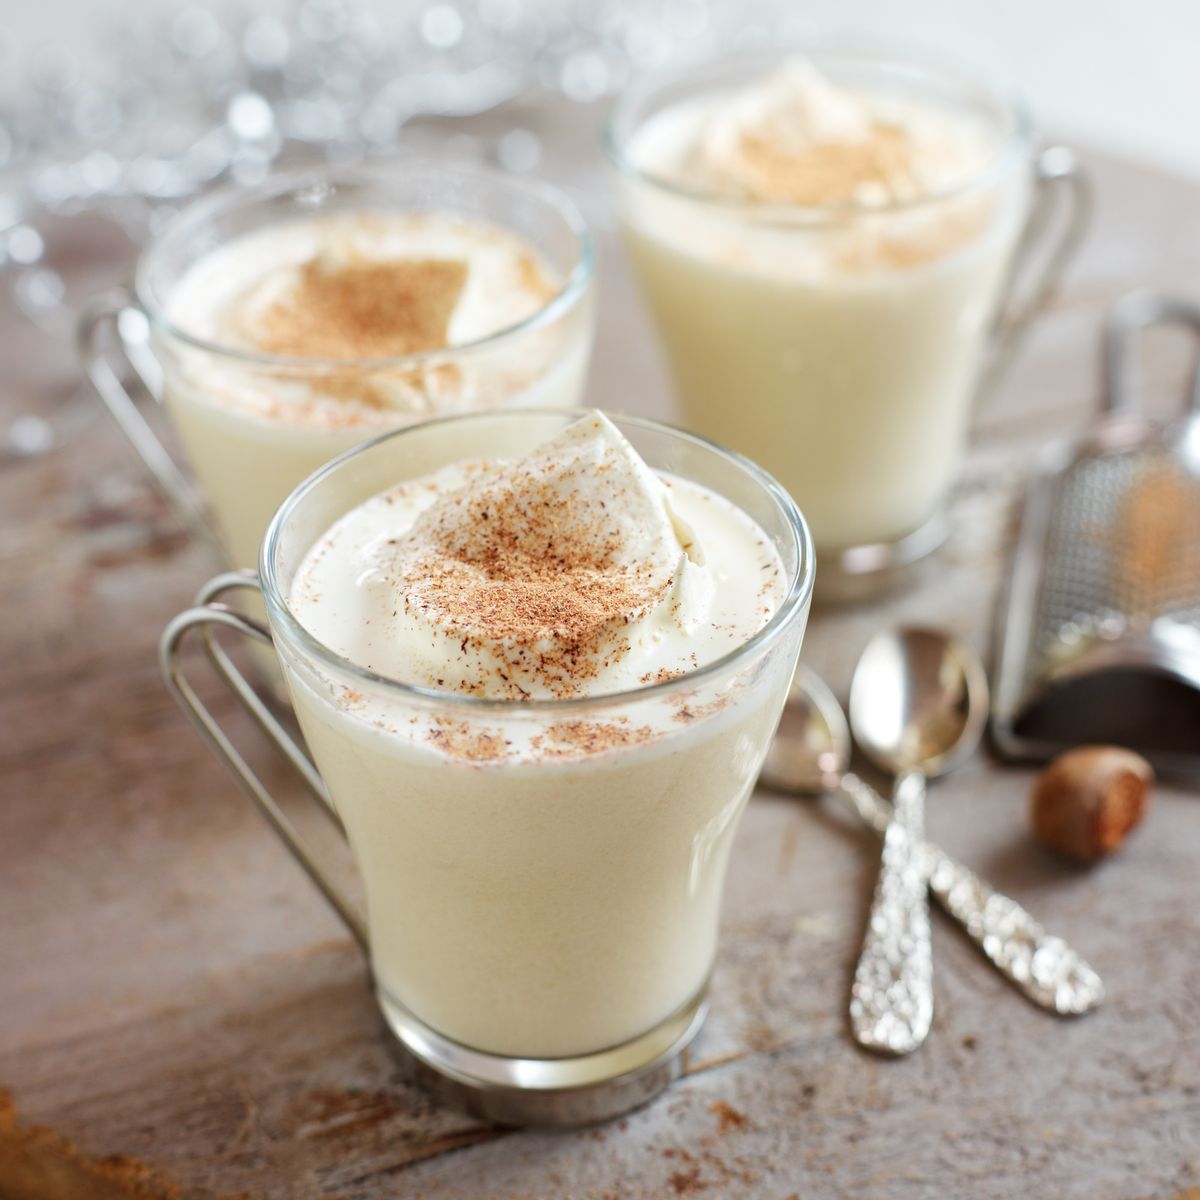 This traditional eggnog recipe is perfect if you want a classic Christmas this year